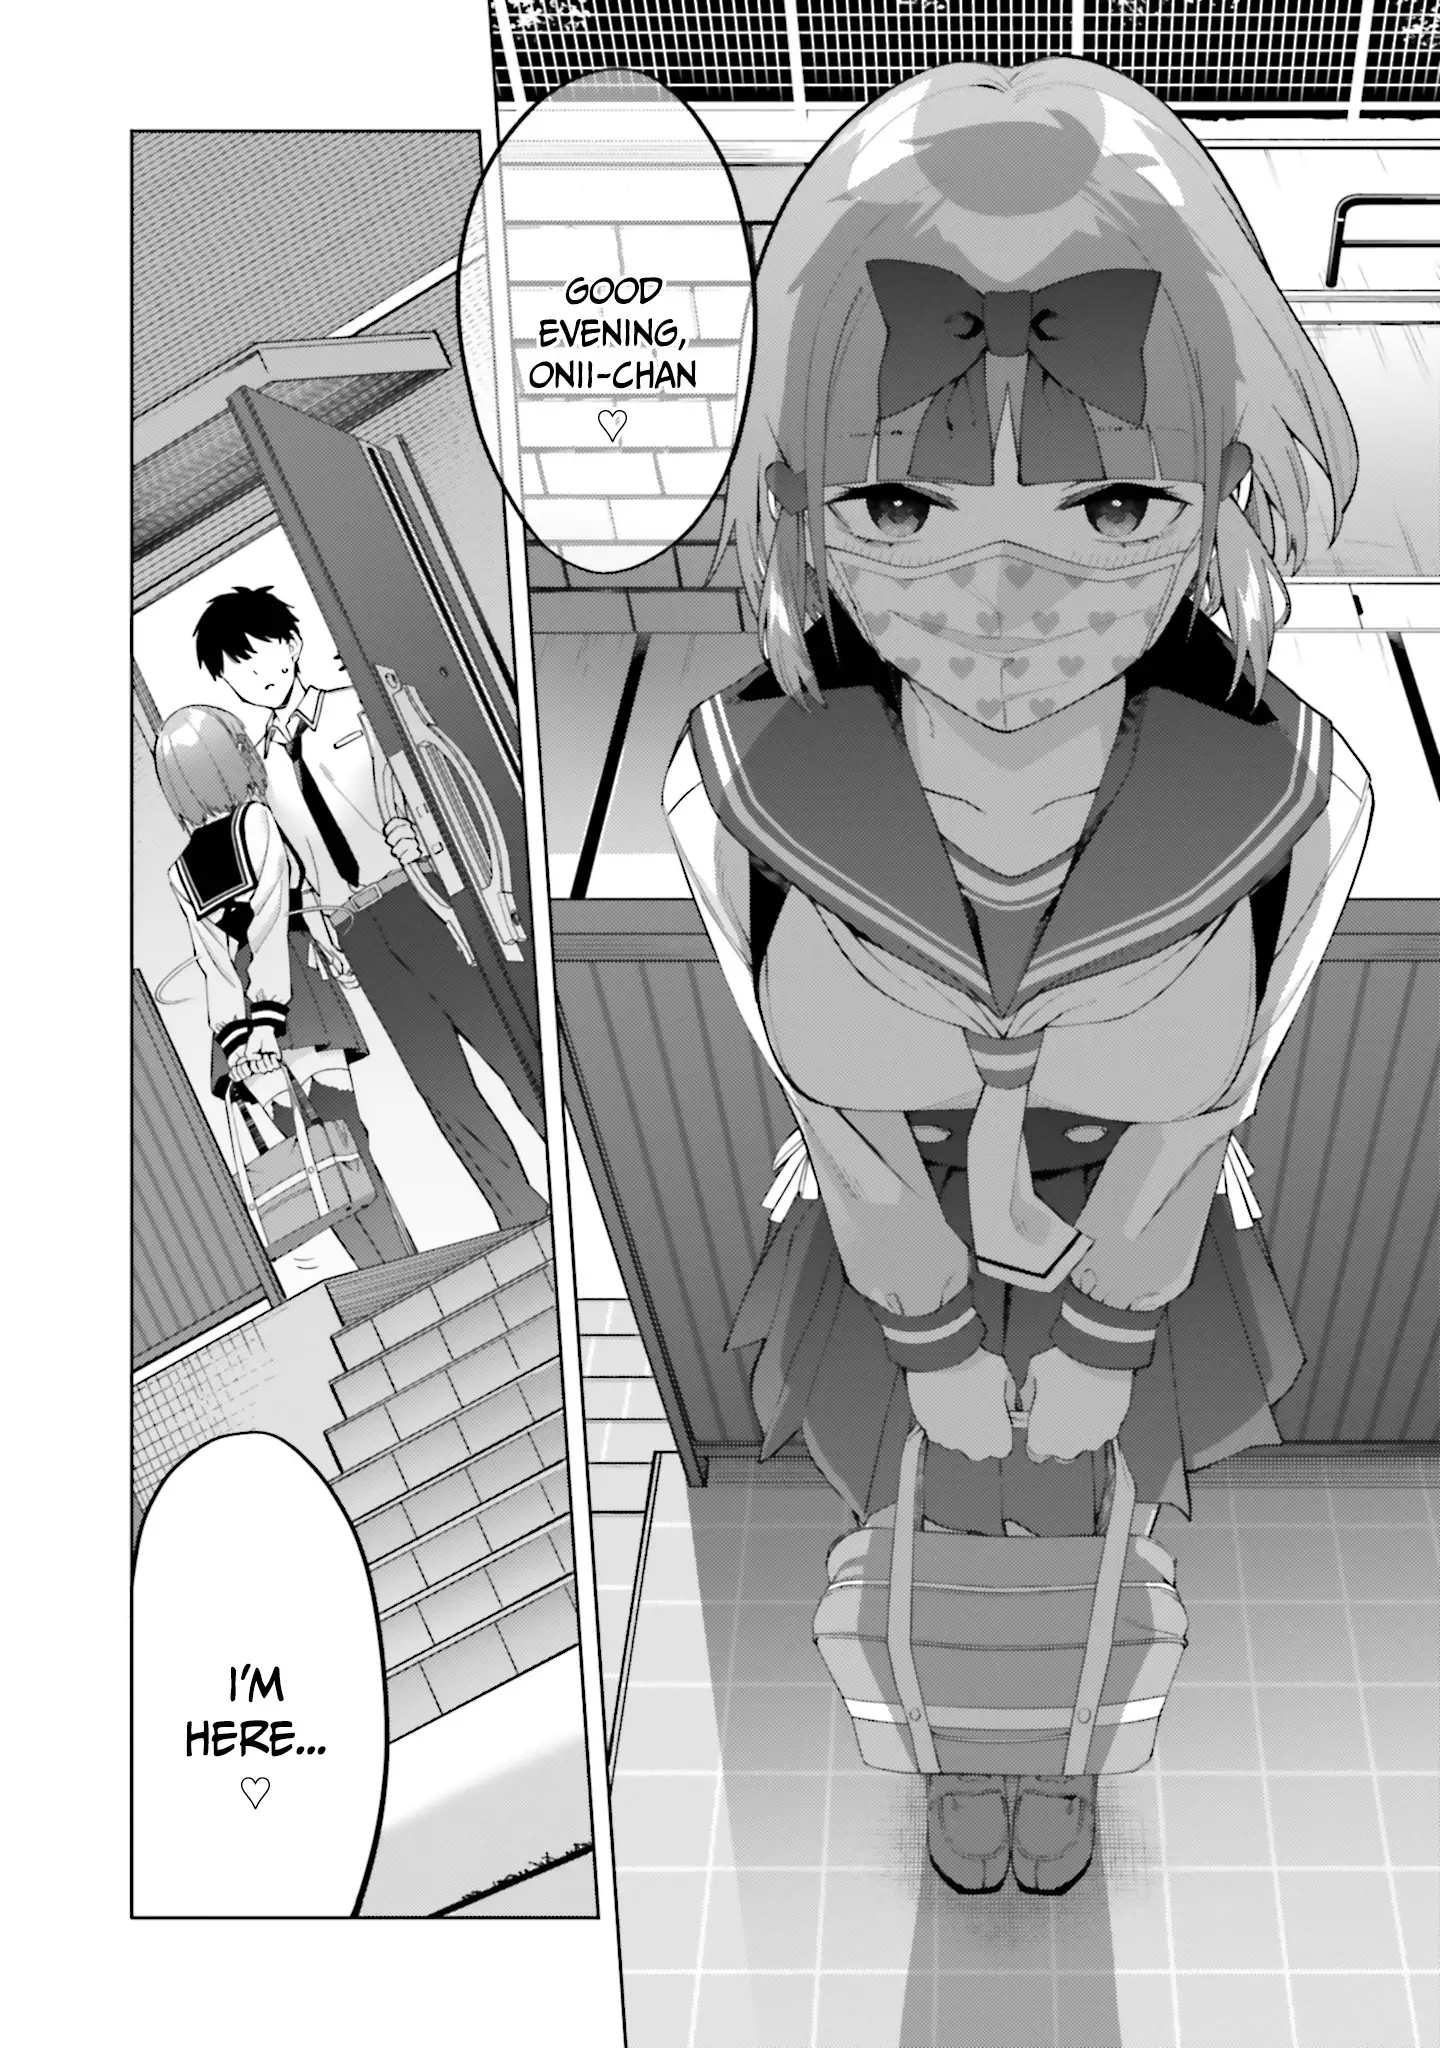 I Don't Understand Shirogane-San's Facial Expression At All - 13 page 29-6918eed0